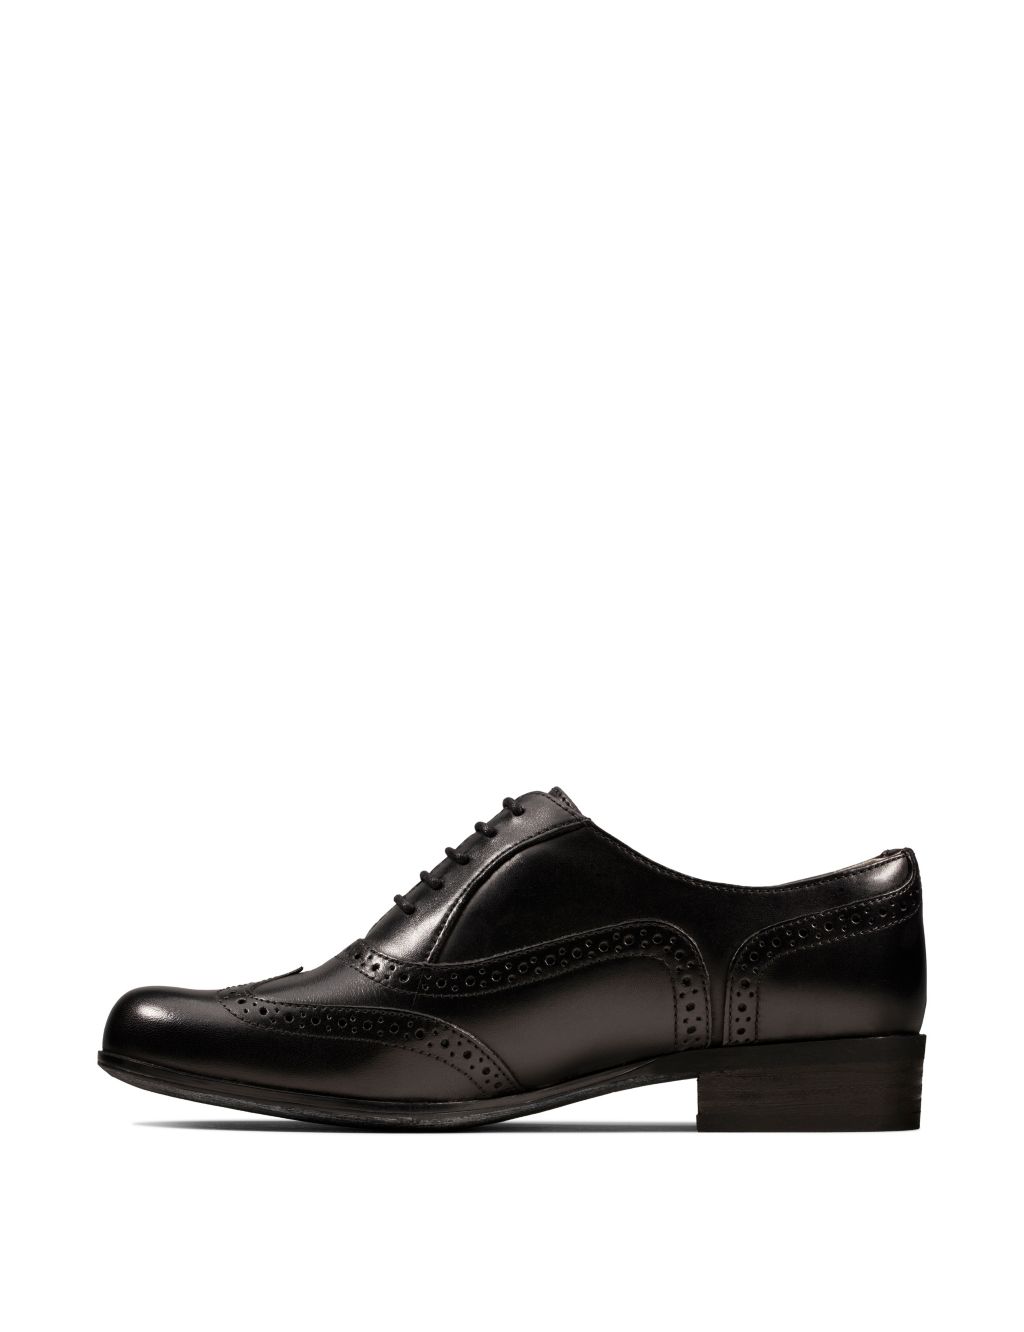 Leather Lace Up Brogues image 5